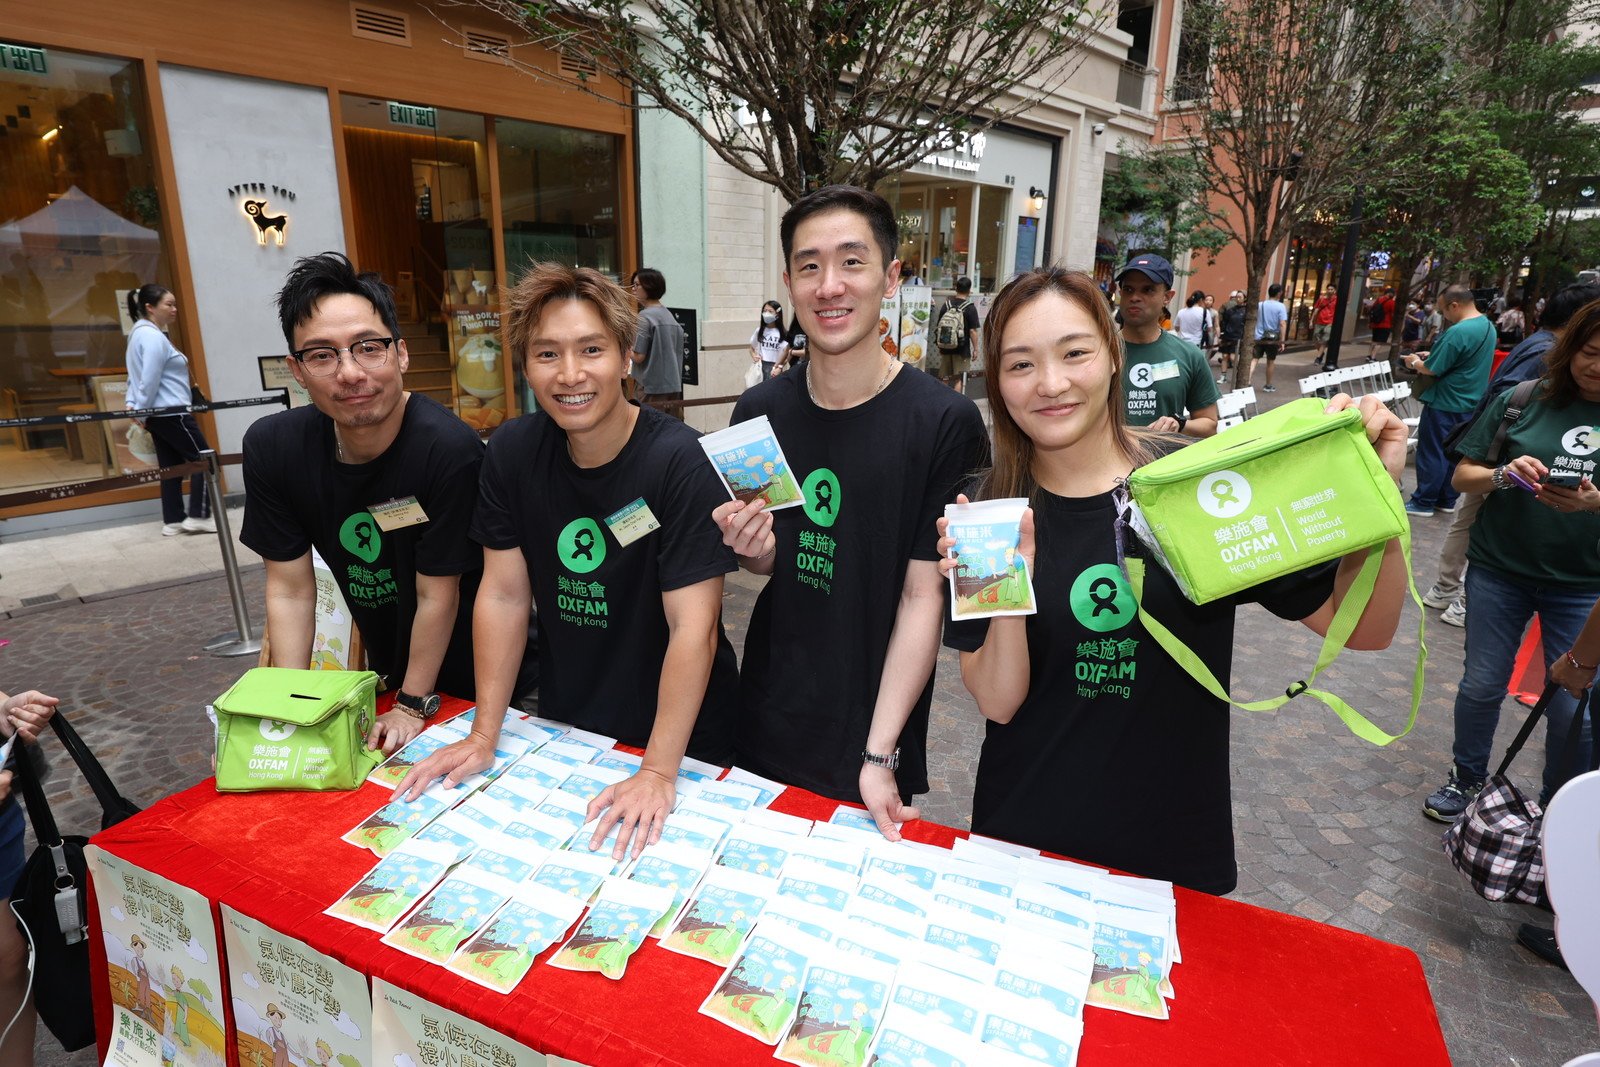 Artist Johnny (far left), singer Jason Chan (second from left), Hong Kong badminton player Tang Chun Man (far right), and Hong Kong badminton player Tse Ying Suet (second from right) actively participated in selling Oxfam rice, supporting impoverished smallholder farmers.